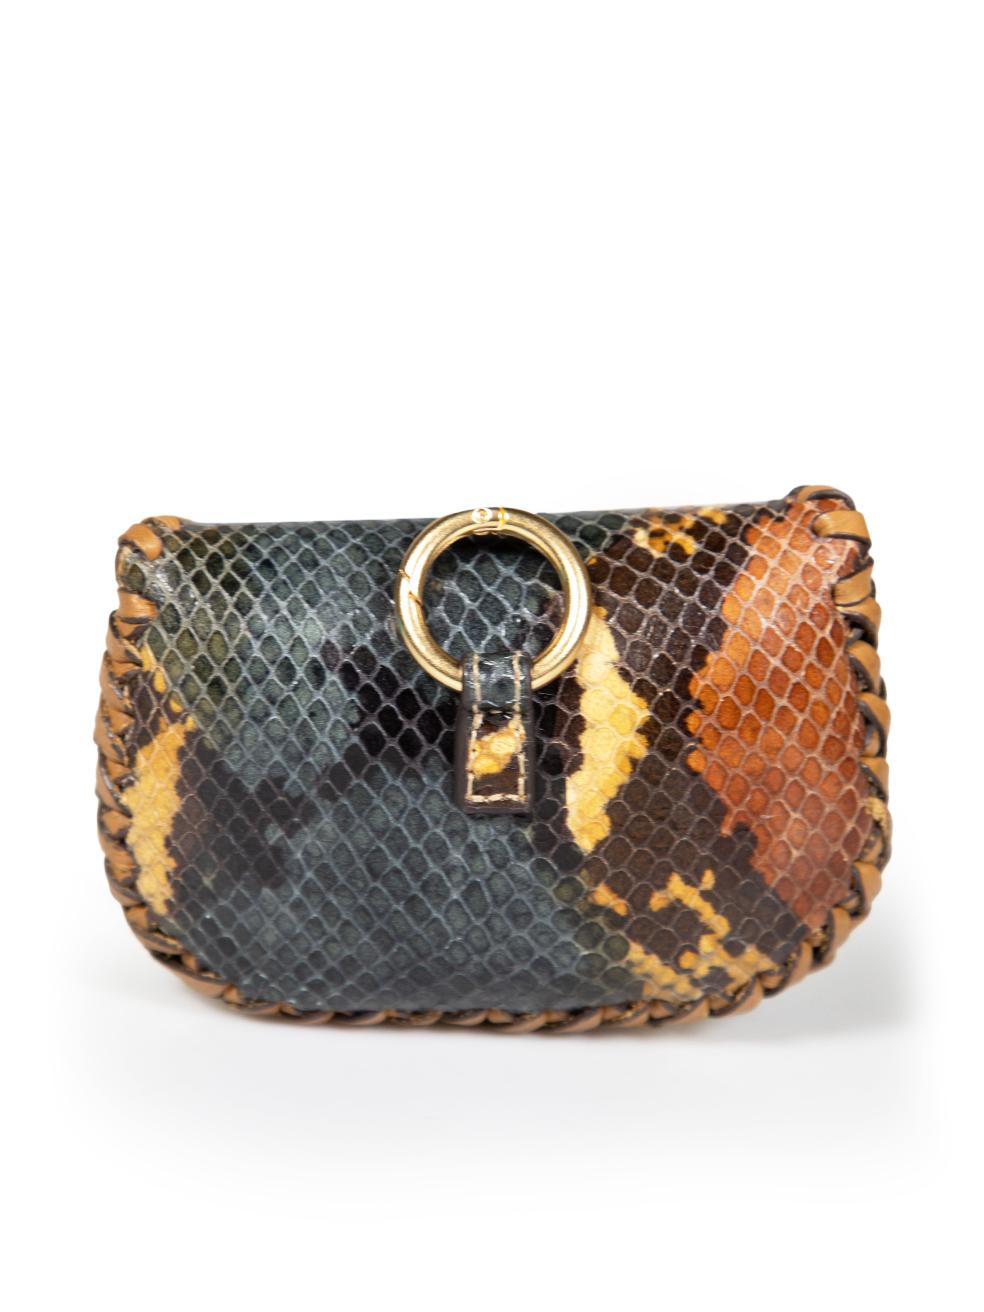 Zadig & Voltaire Snakeskin Coin Purse In Good Condition For Sale In London, GB